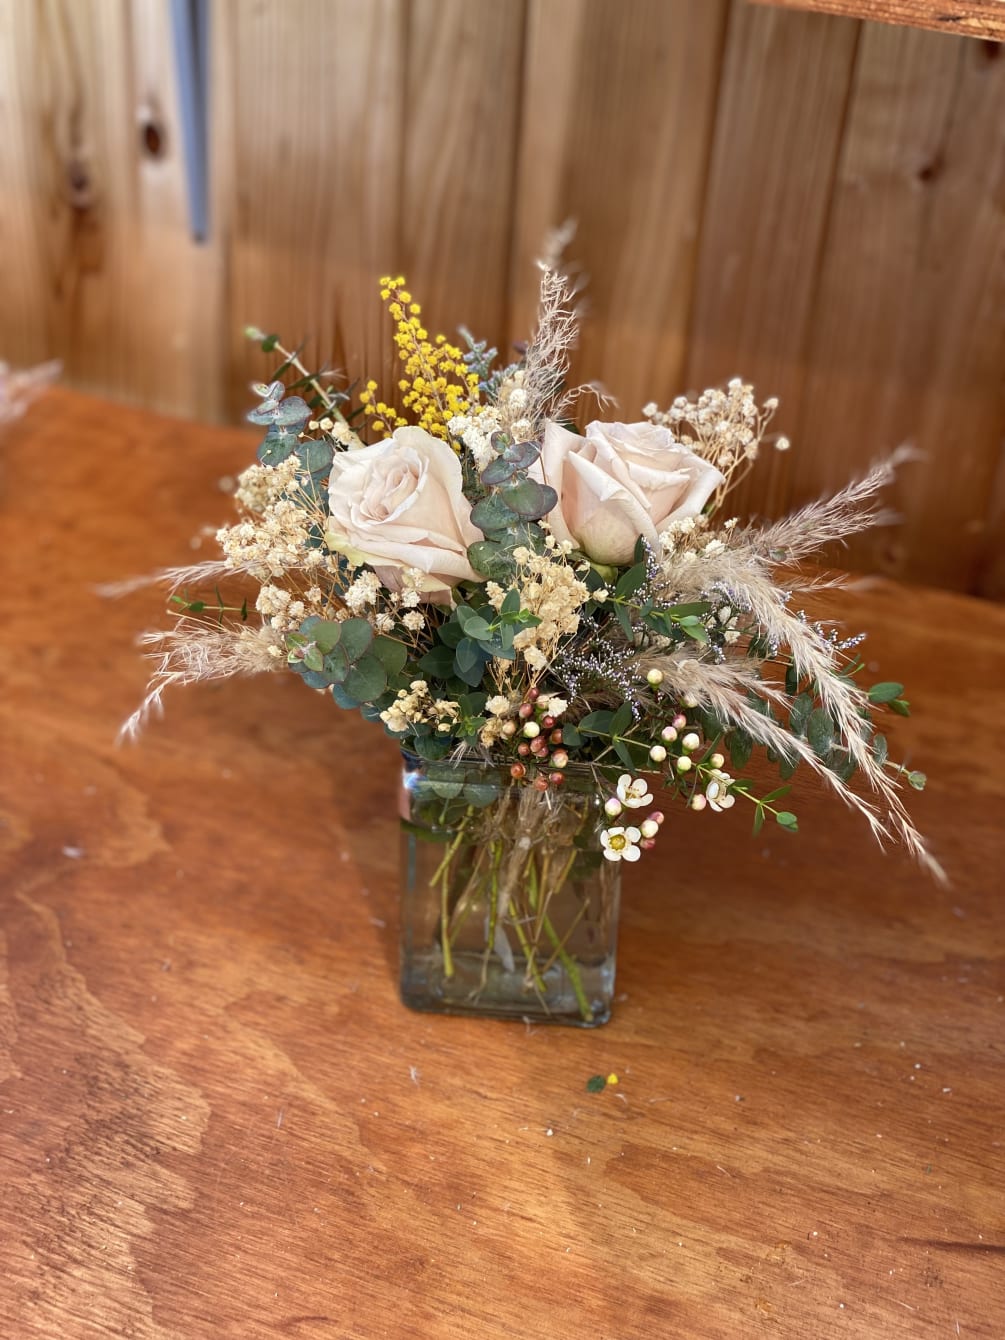 A natural arrangement look with dried pampas, fresh roses, spray roses, sprays